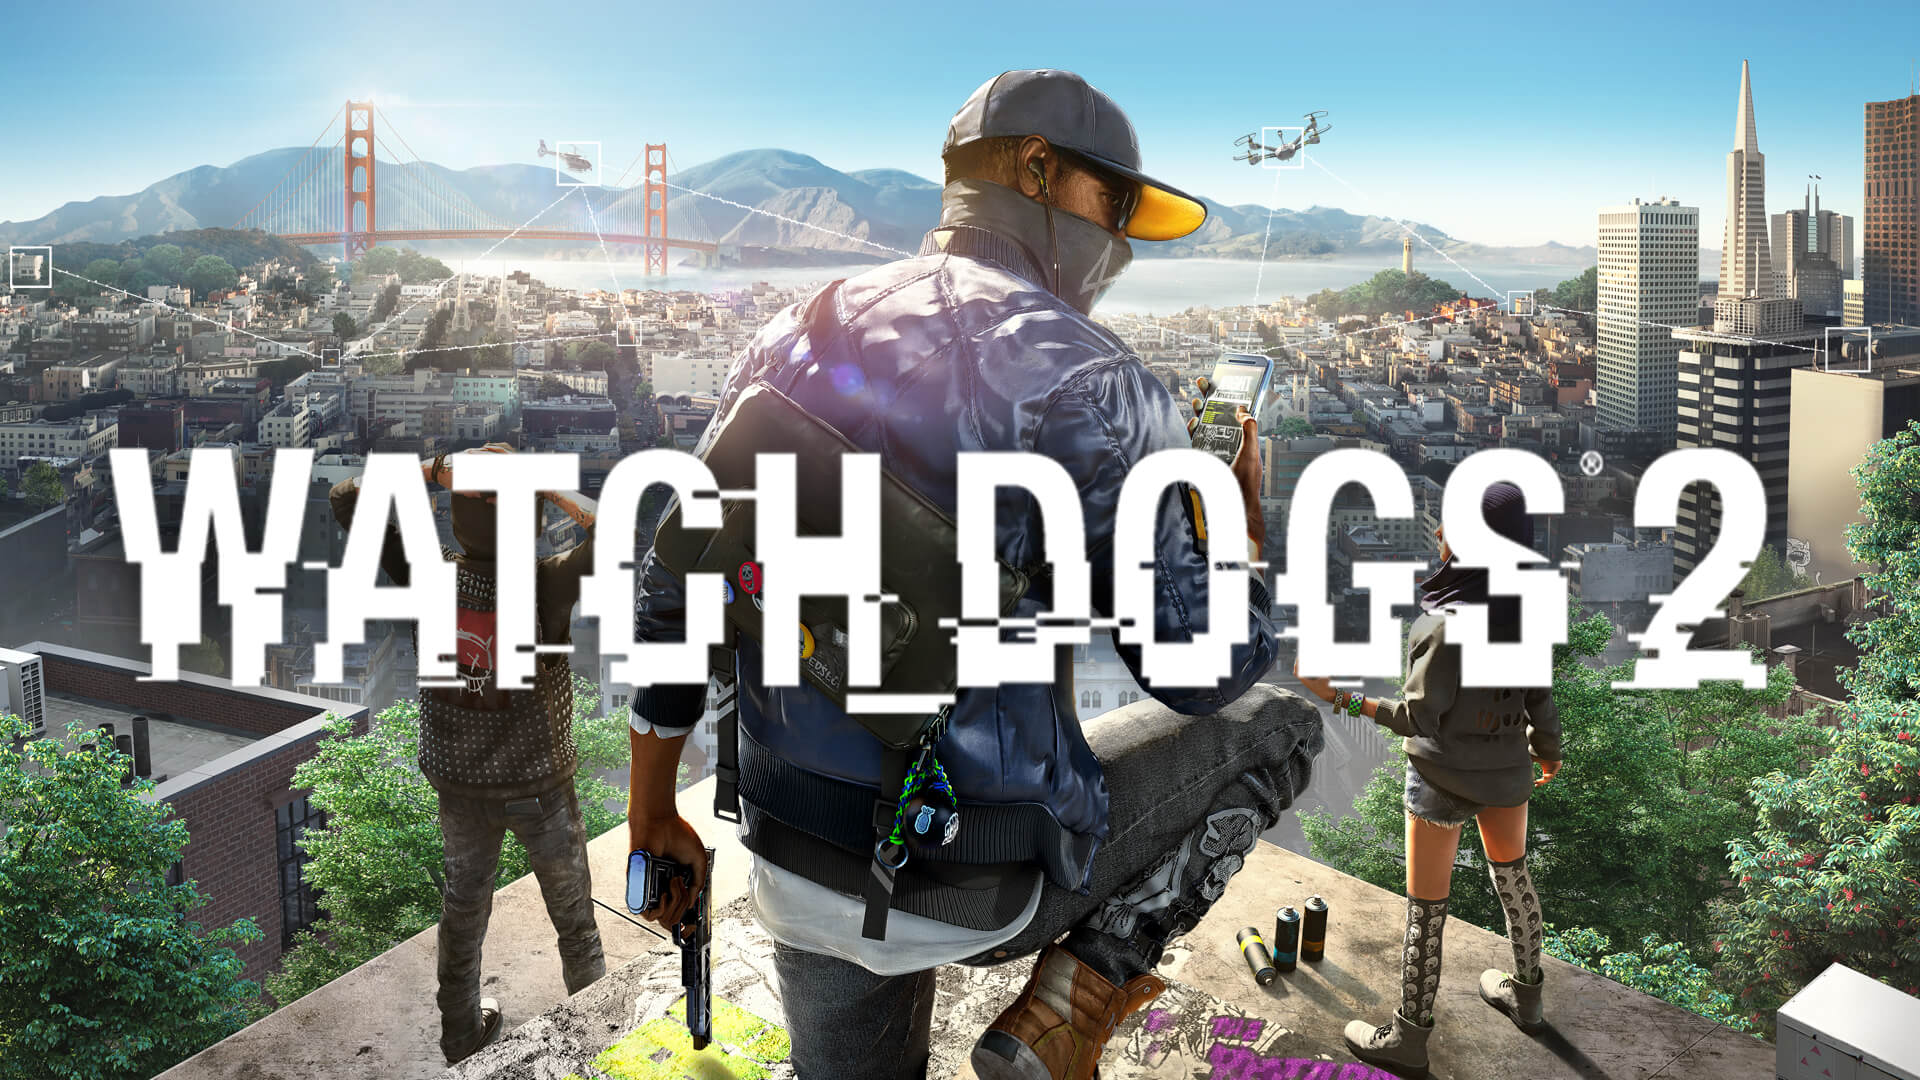 Watch Dogs 2 Xbox Version Full Game Free Download